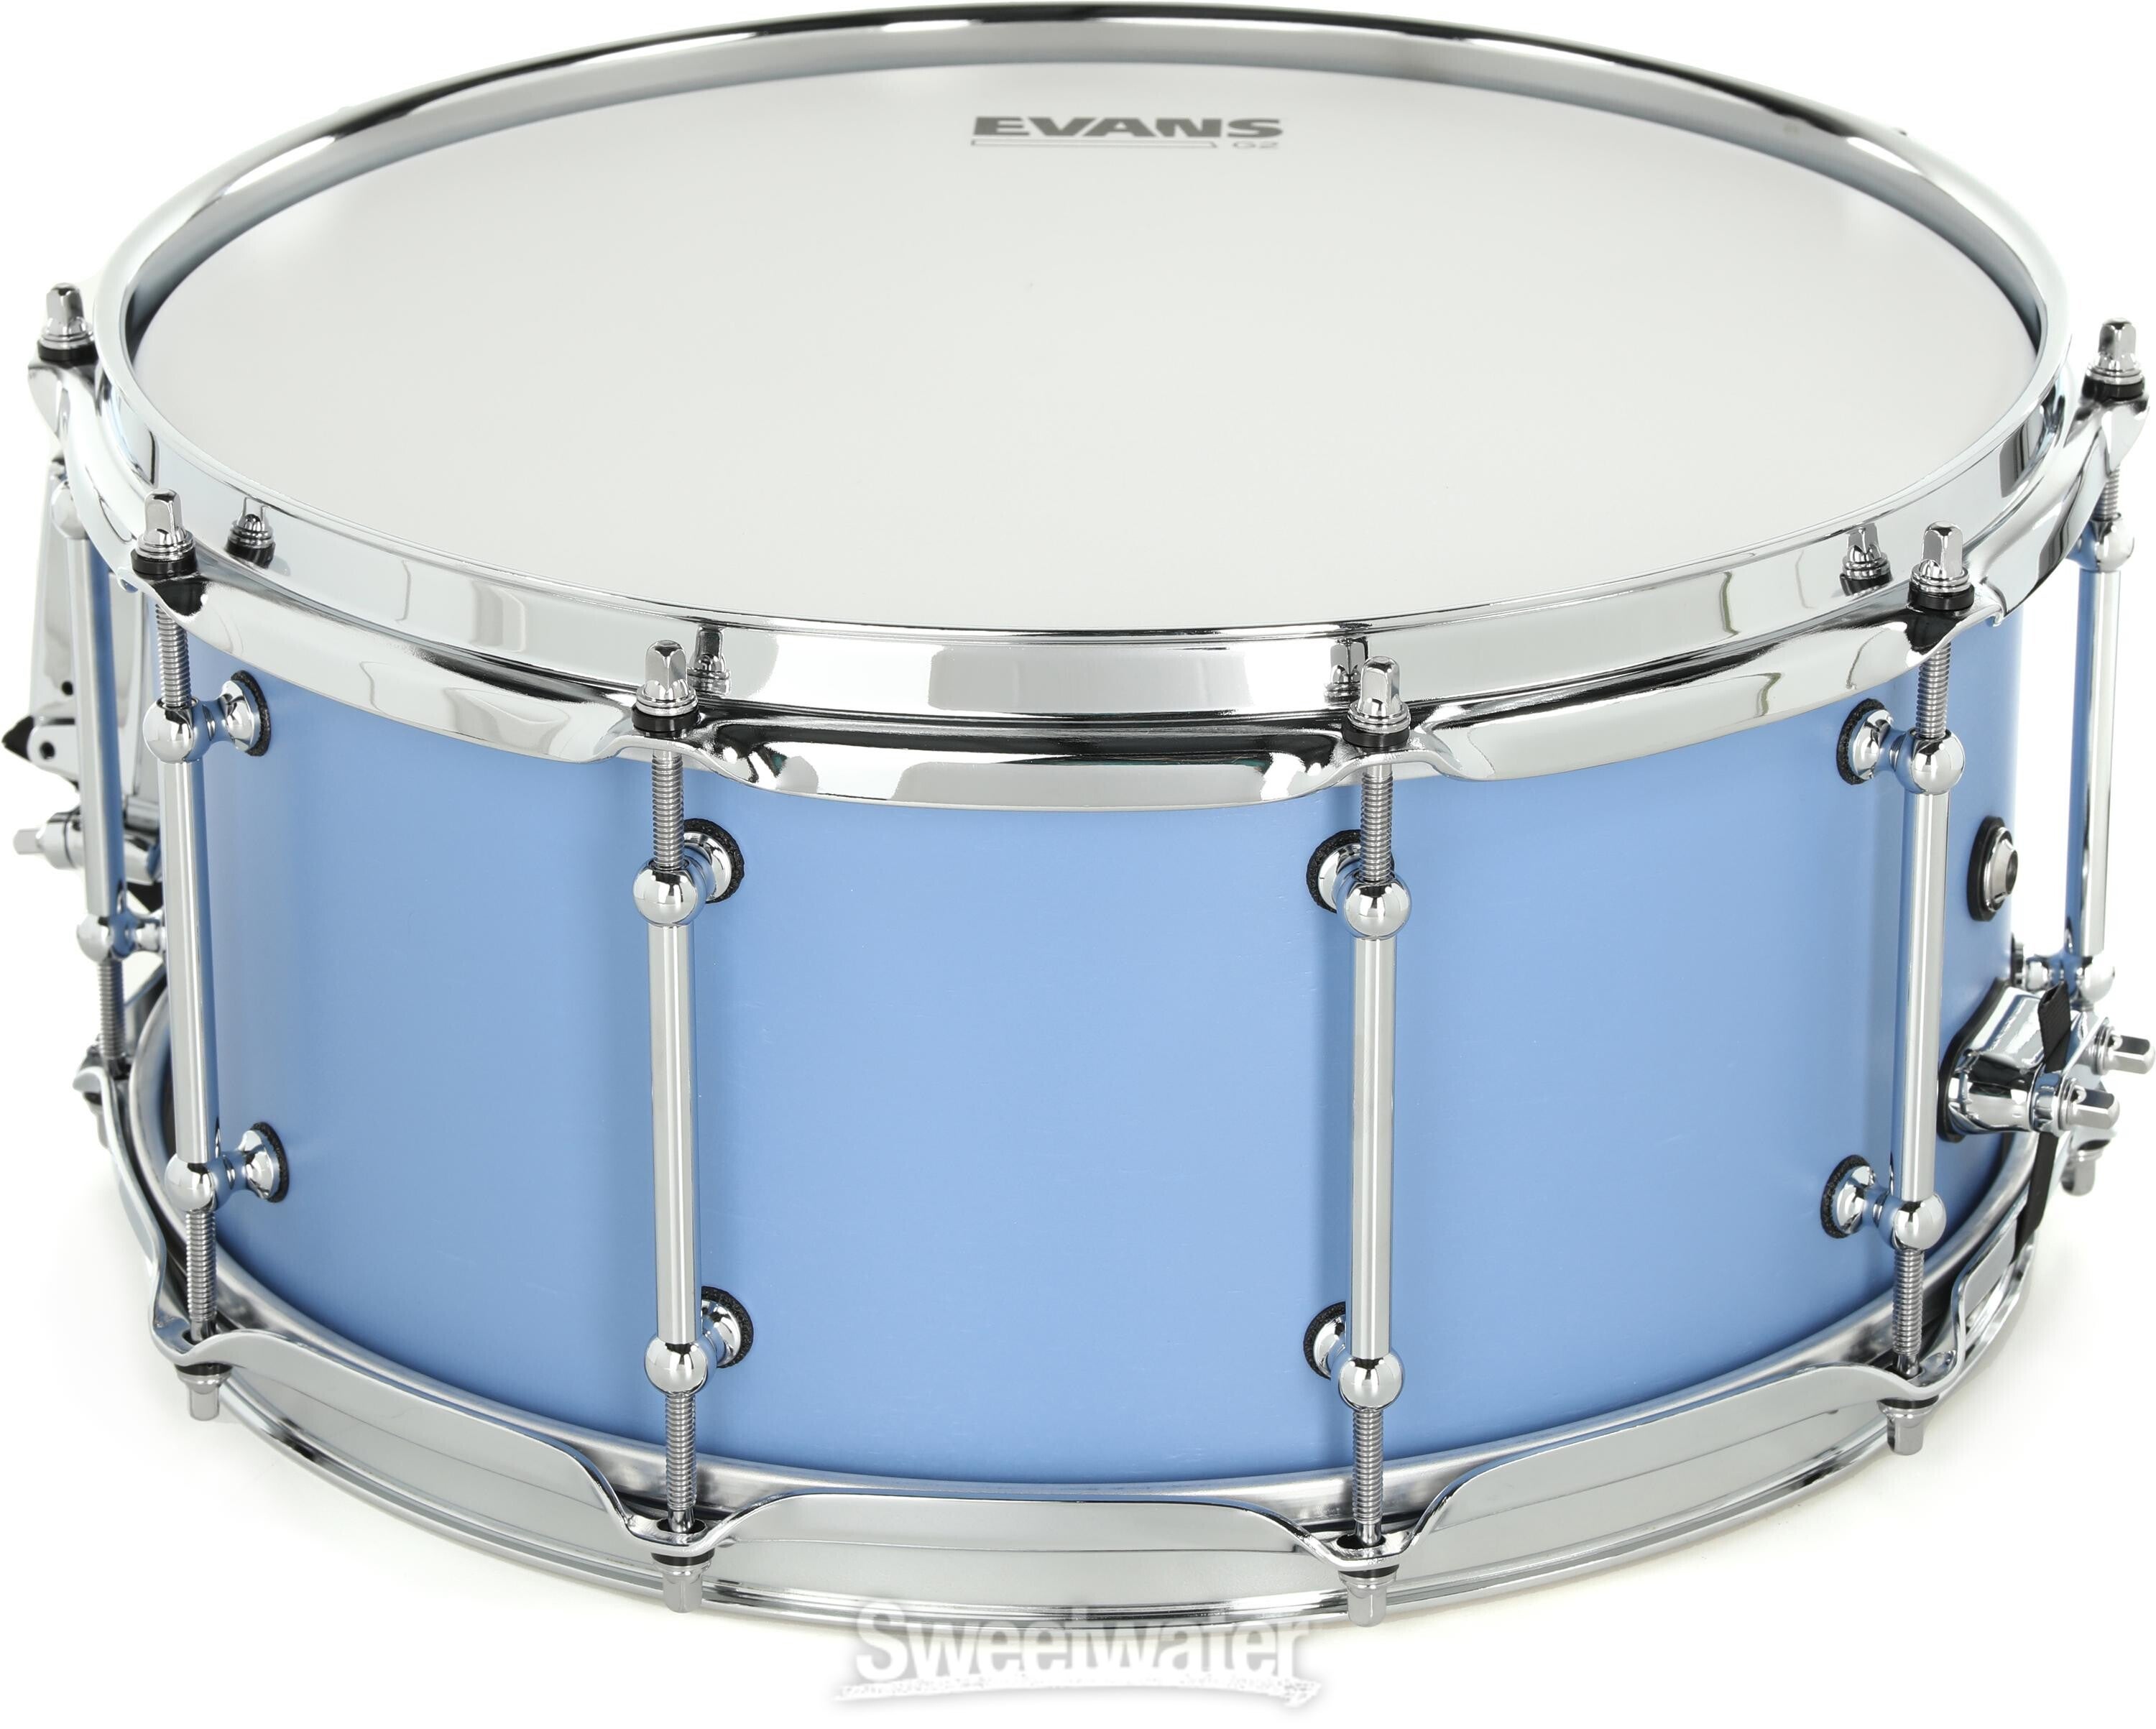 SJC Custom Drums Tour Series Snare Drum - 6.5 x 14-inch - Lavender Ash -  Sweetwater Exclusive